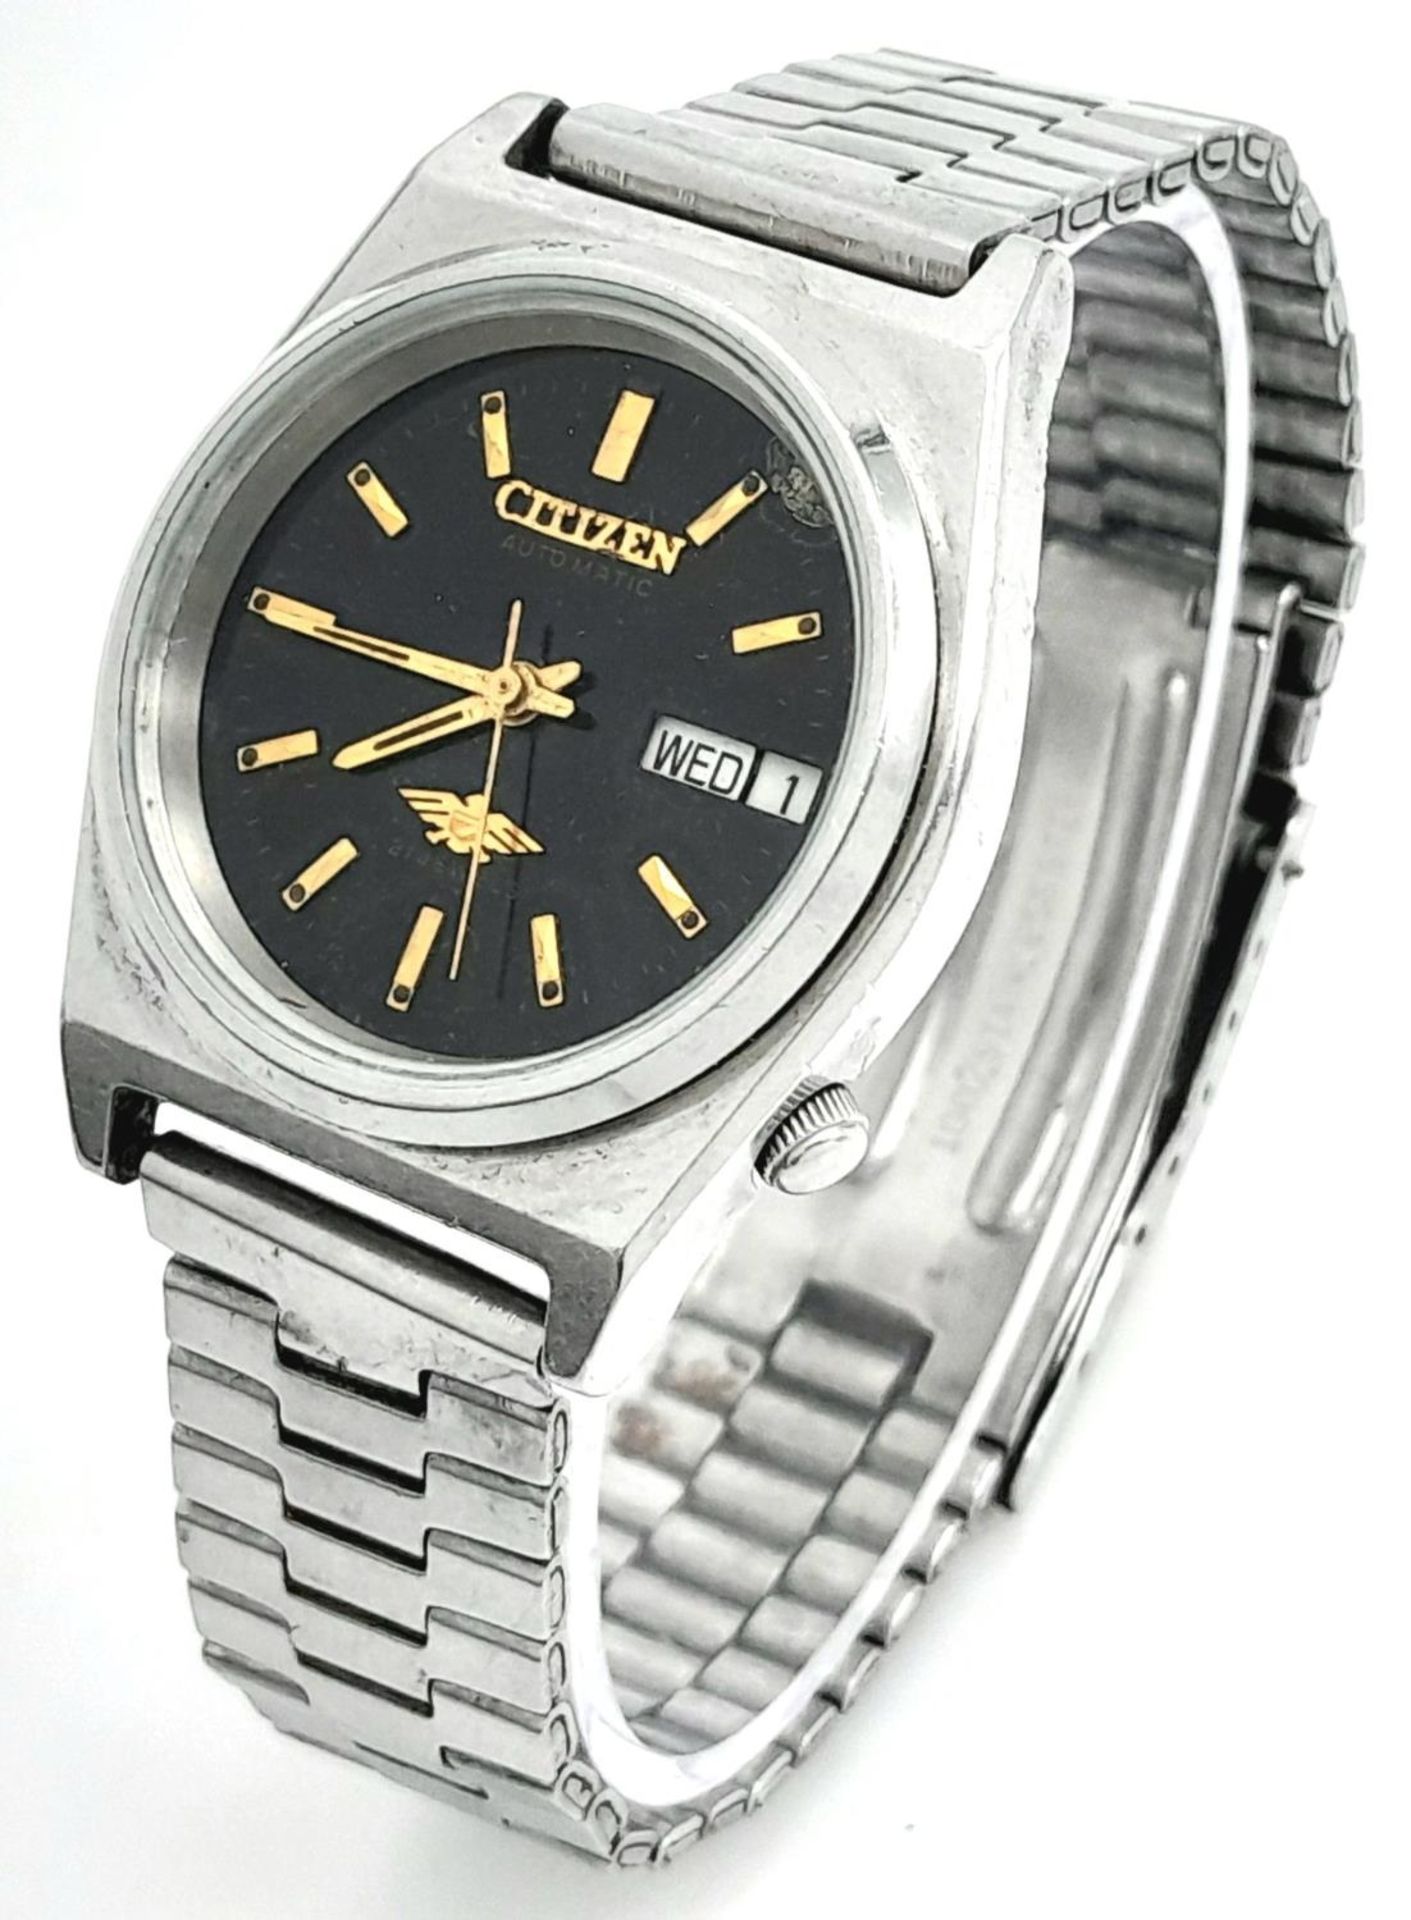 A Vintage Citizen Automatic Gents Watch. Stainless steel bracelet and case - 33mm.